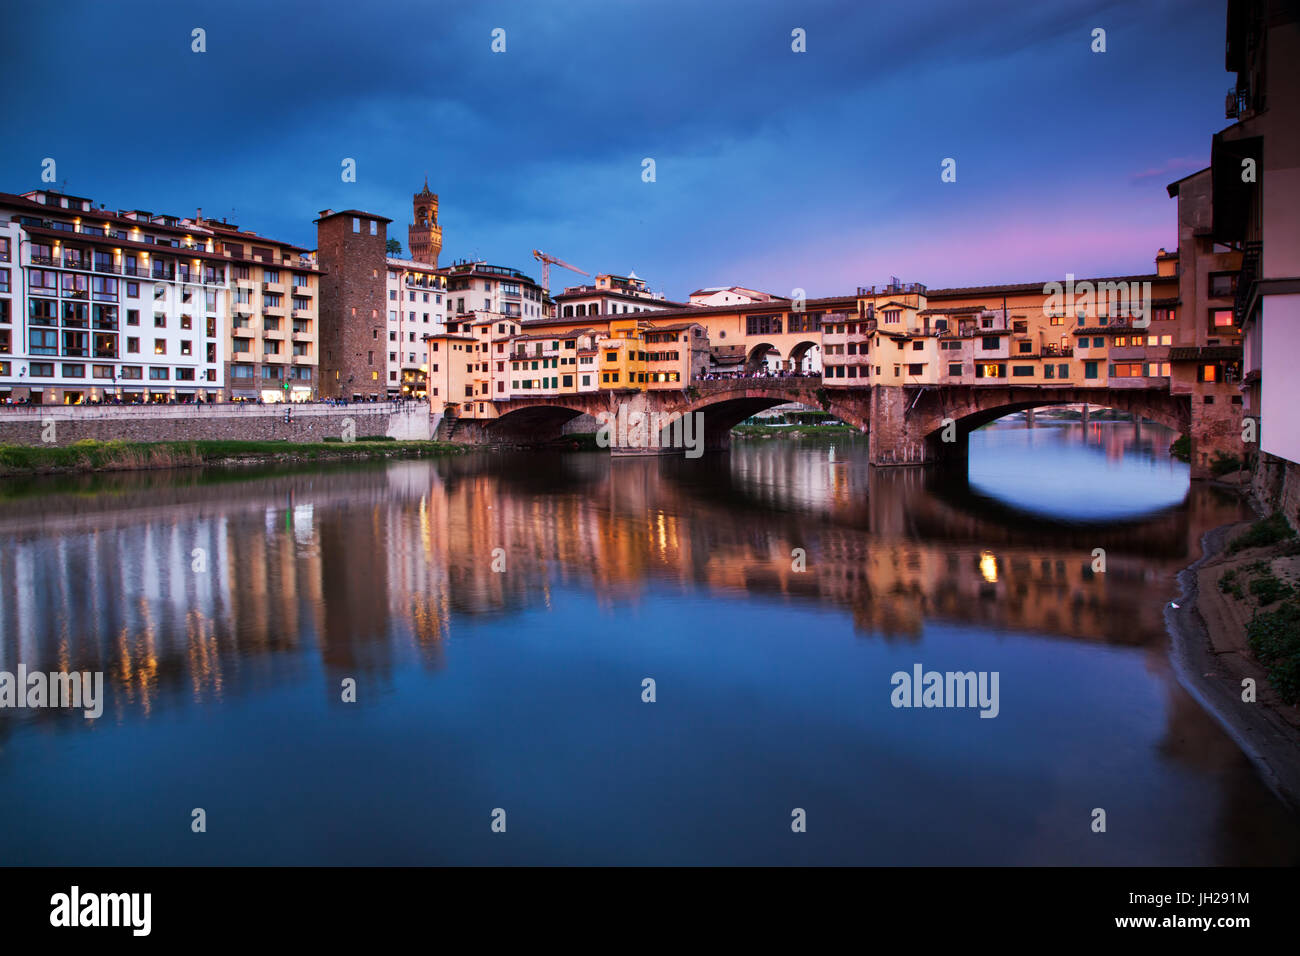 Ponte Vecchio at night reflected in the River Arno, Florence, UNESCO World Heritage Site, Tuscany, Italy, Europe Stock Photo